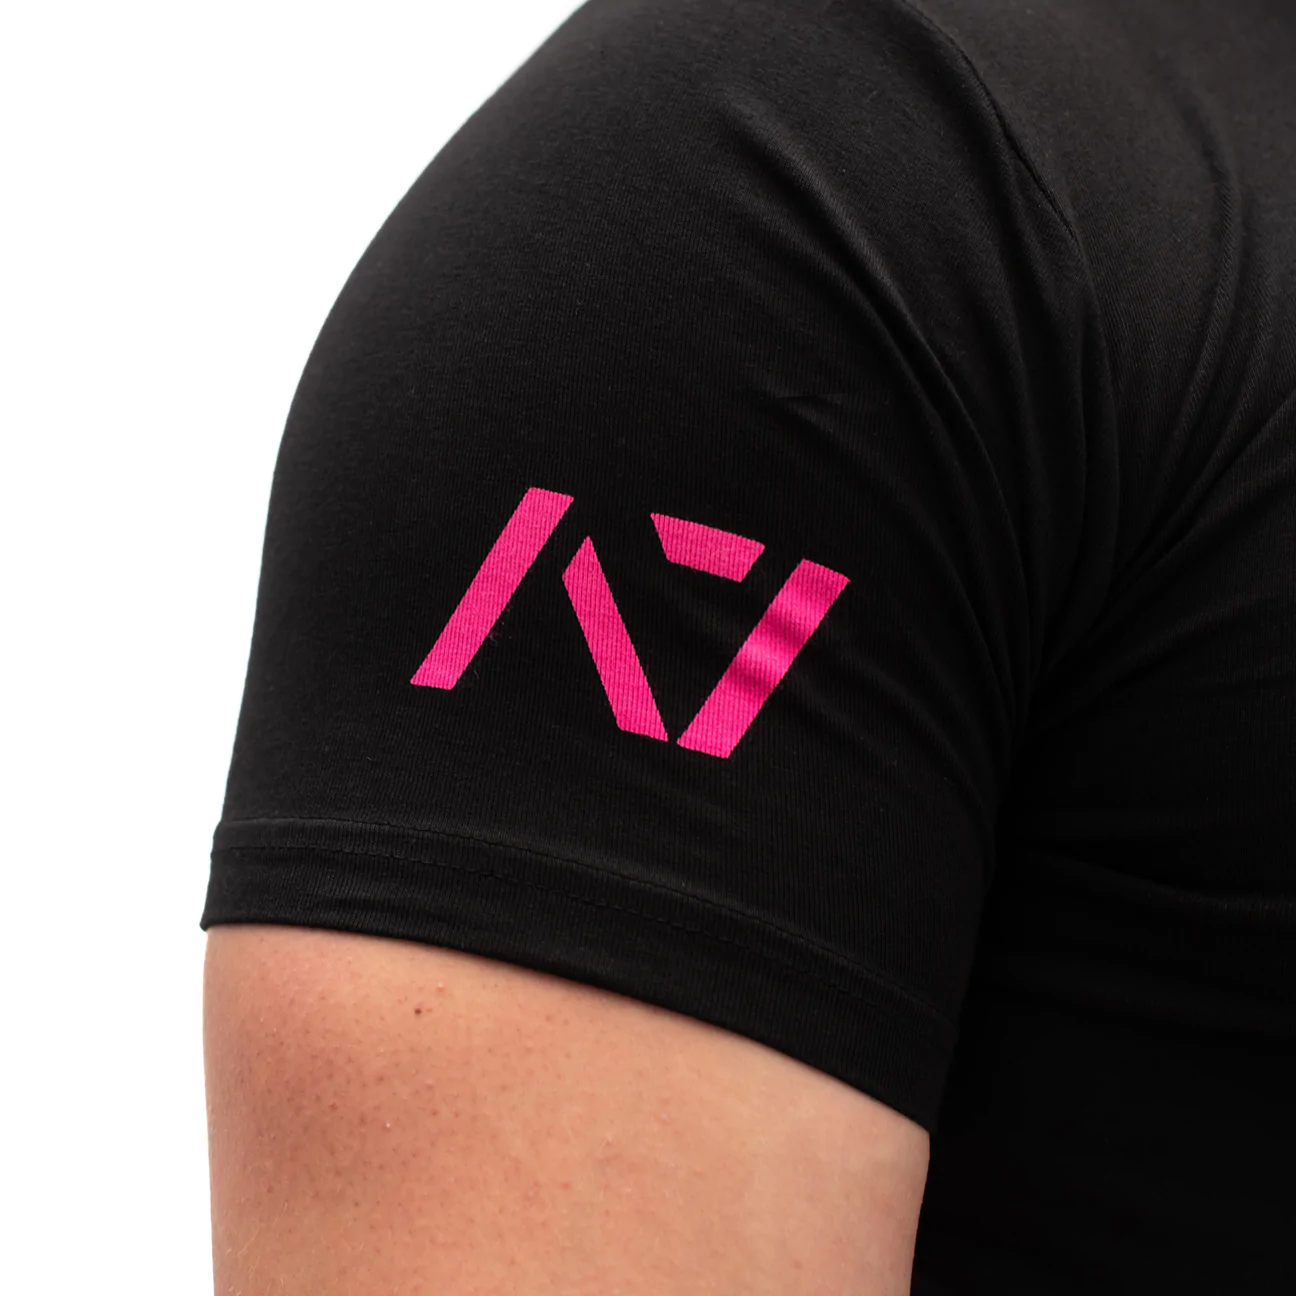 The Lift Bar Grip Shirt reminds us of our focus in workouts – to Lift Barbells! The design features a fun pop of colour on the dark background. The Lift Bar Grip Shirt is great for powerlifters. Purchase Lift Bar Grip from A7 UK and A7 Europe. The silicone grip helps with slippery commercial benches and bars and anchors the barbell to your back. A7UK has the best Powerlifting apparel for all workouts. Available in UK and Europe including France, Italy, Germany, the Netherlands, Sweden and Poland.